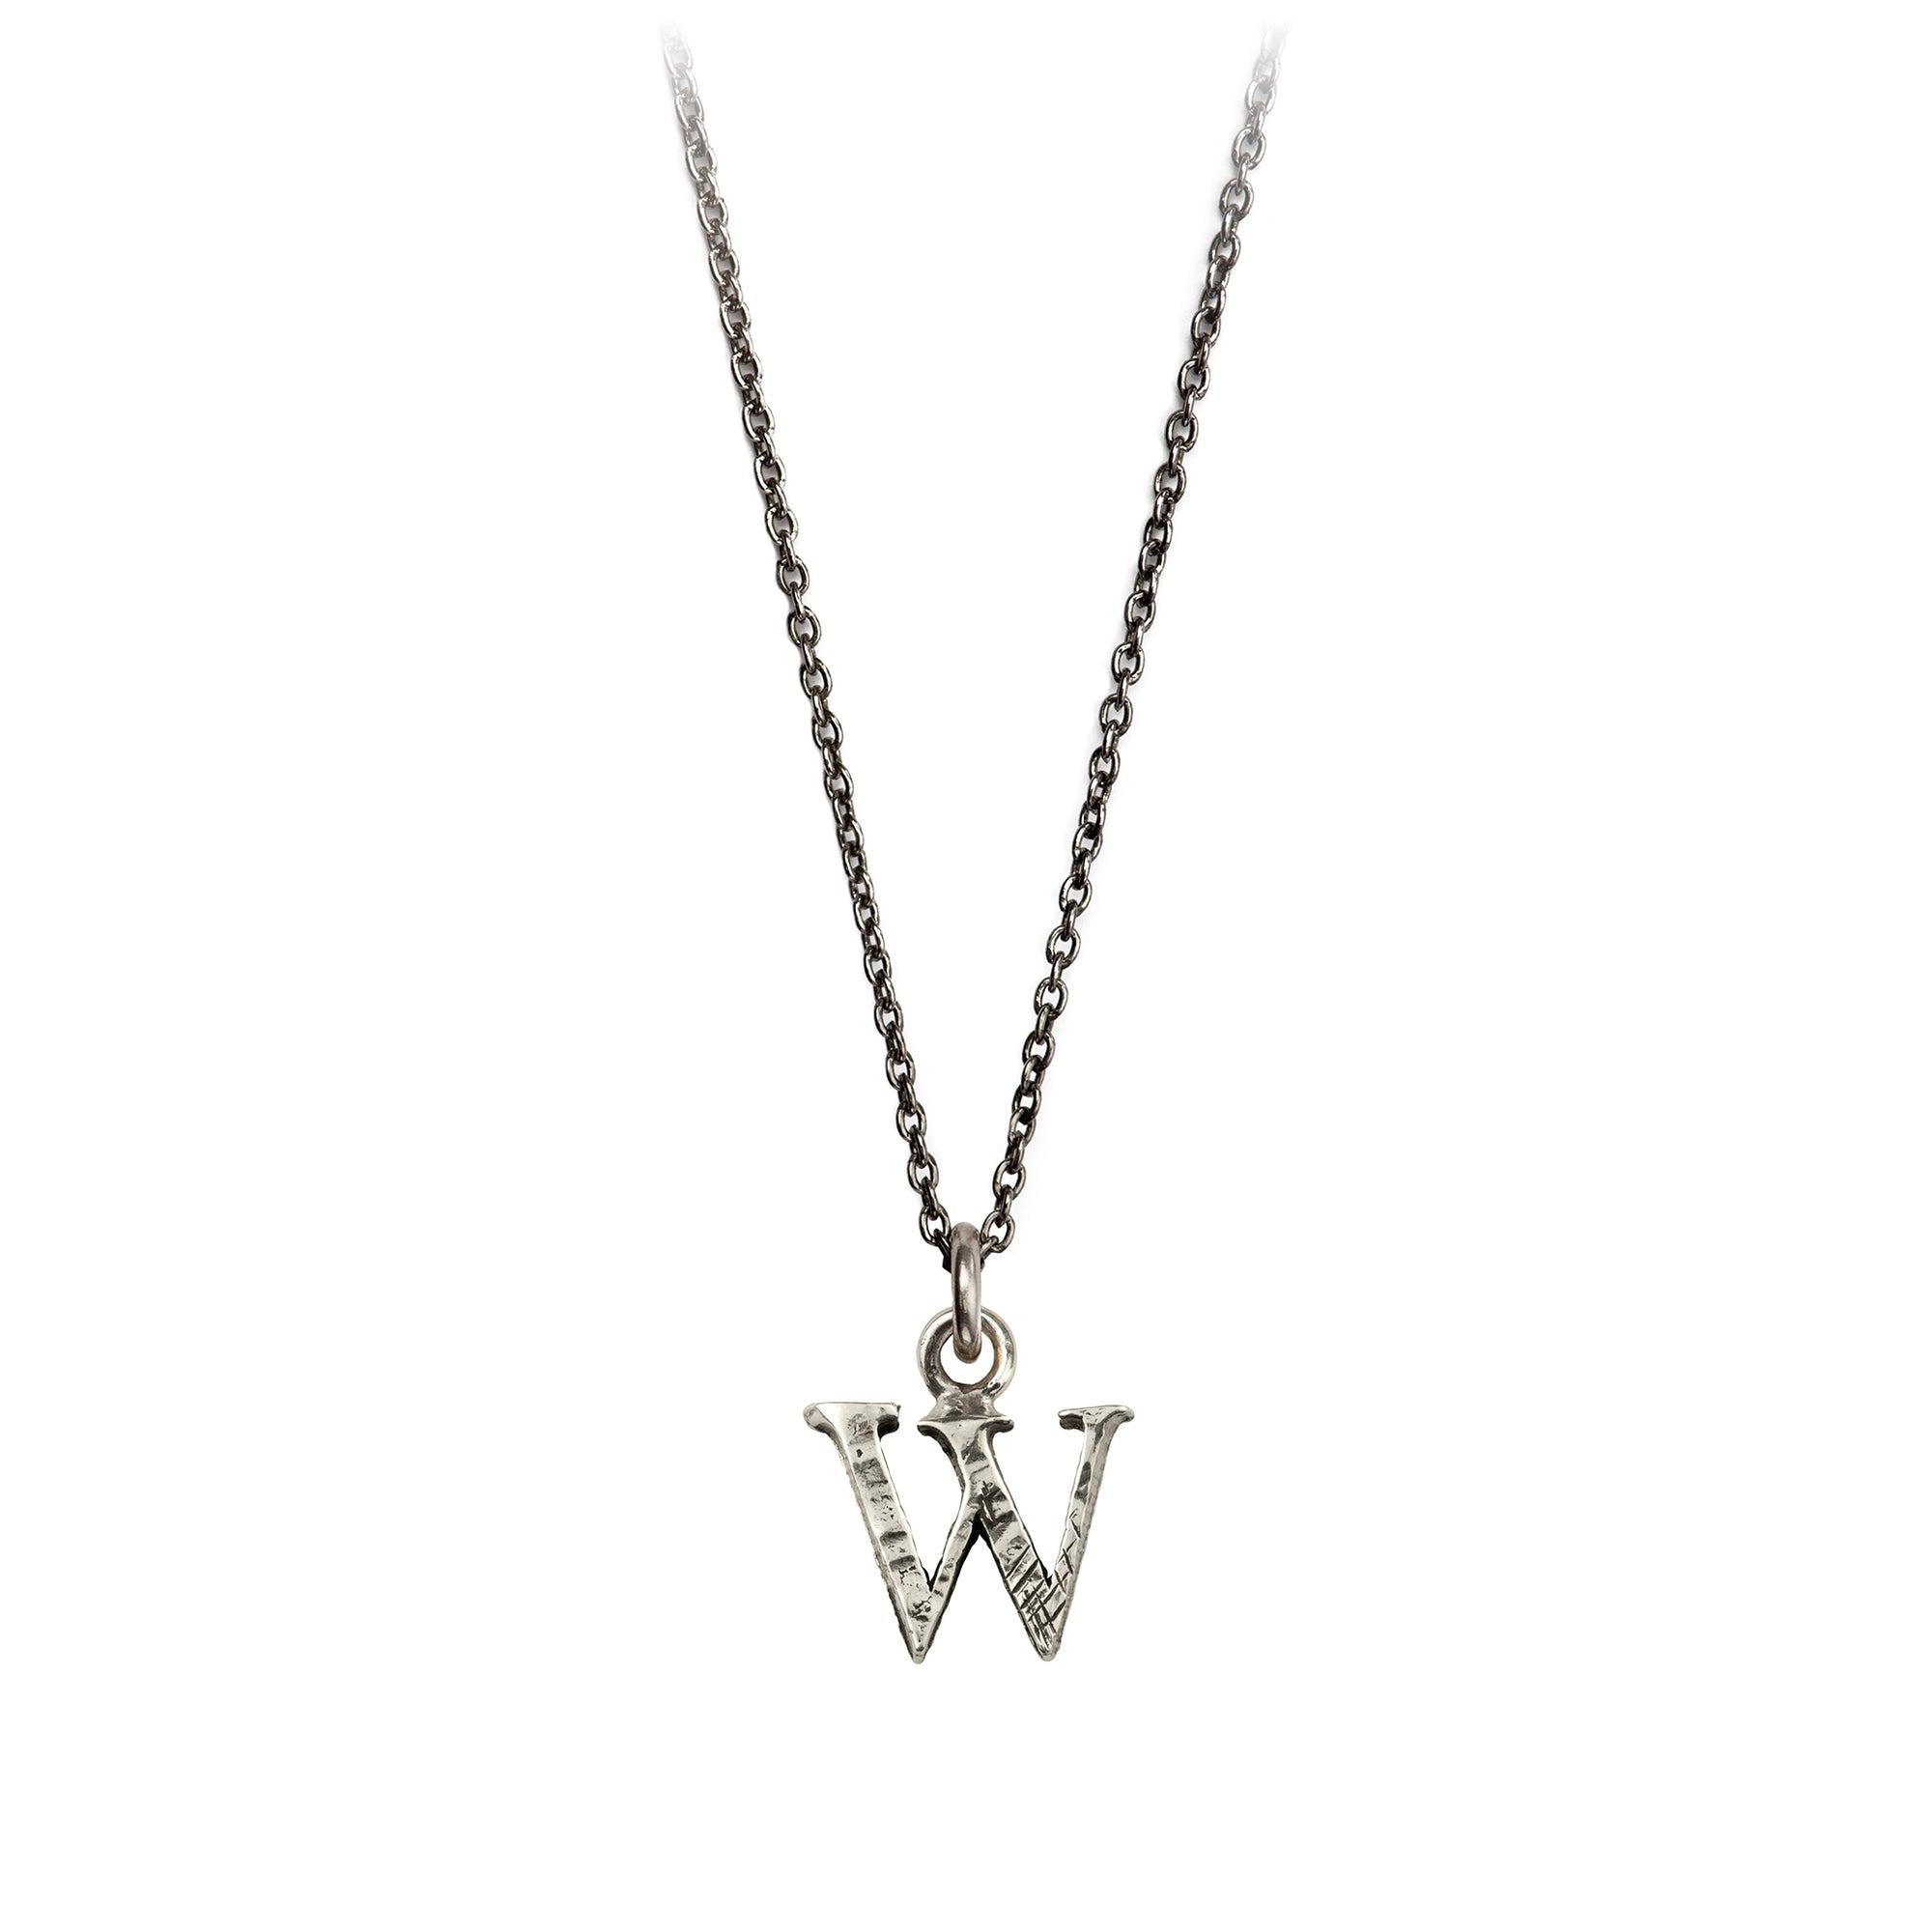 A sterling silver letter "W" charm on a silver chain.